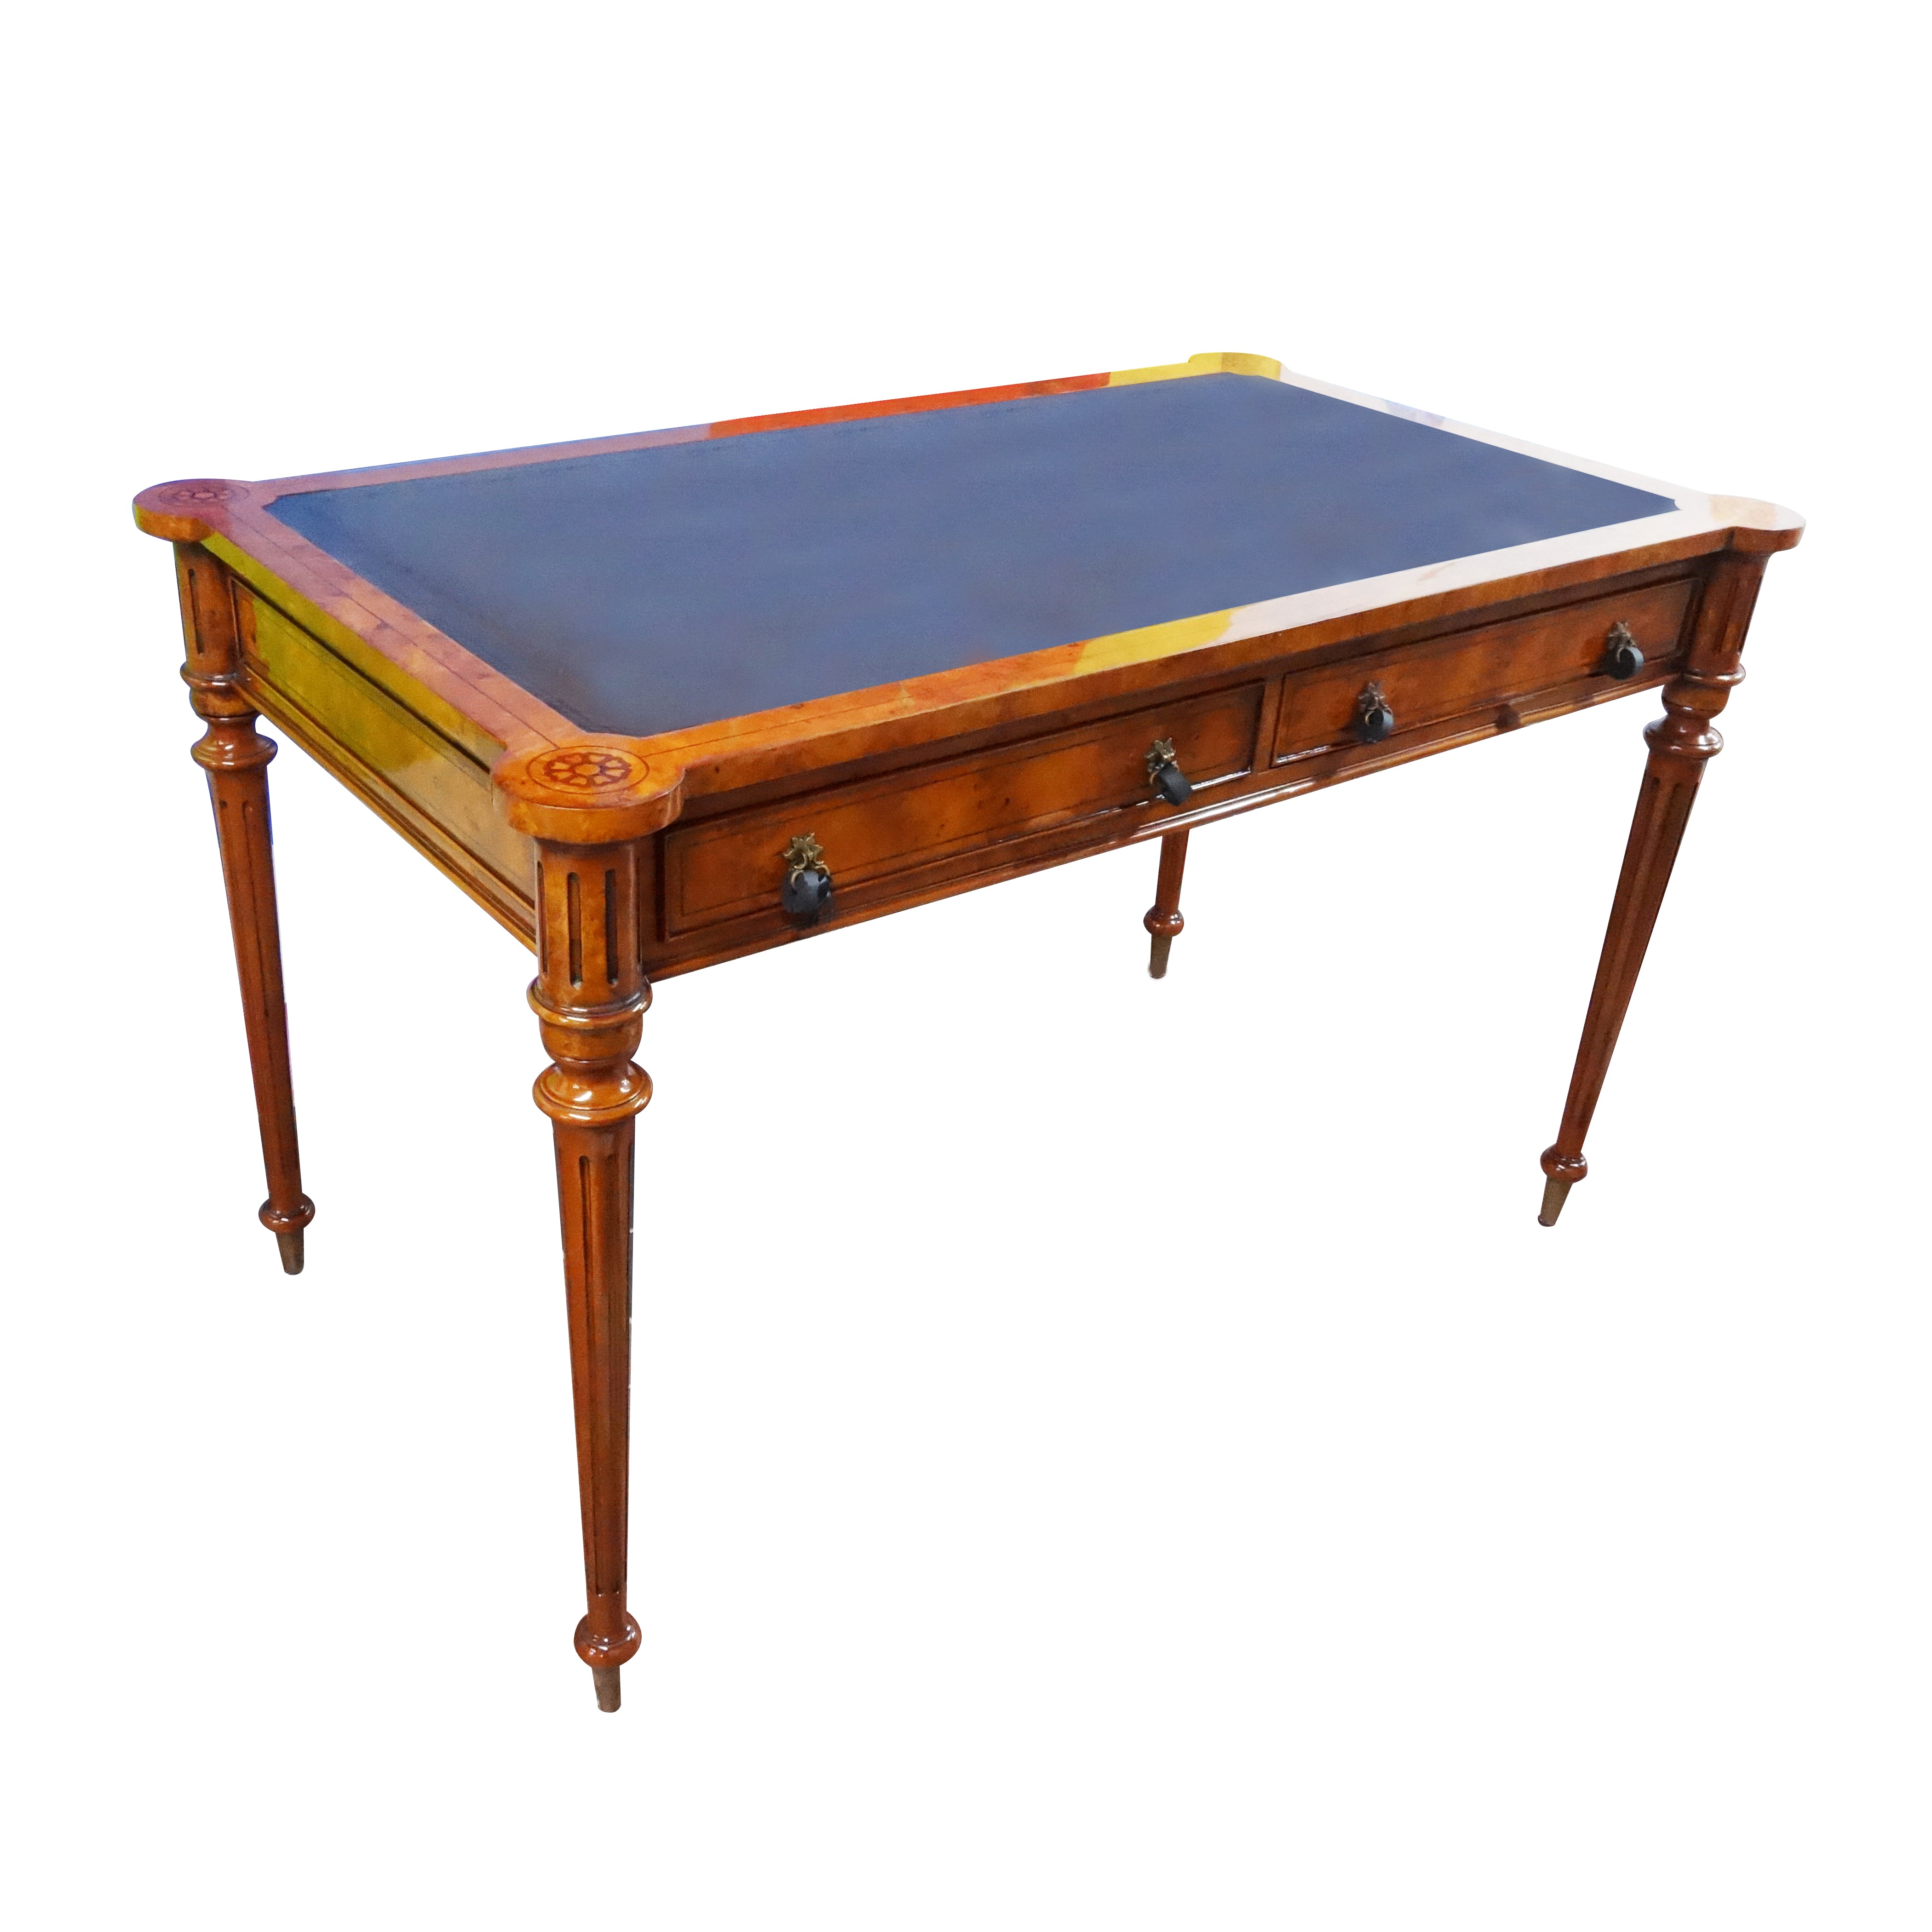 Very popular and elegant writing table in solid mahogany and  burl veneer and  tool leather top .  Inlay on two drawers with brass pull. Desk legs feature intricate inlaid work on rounded corners and mounted brass cover the feet. 